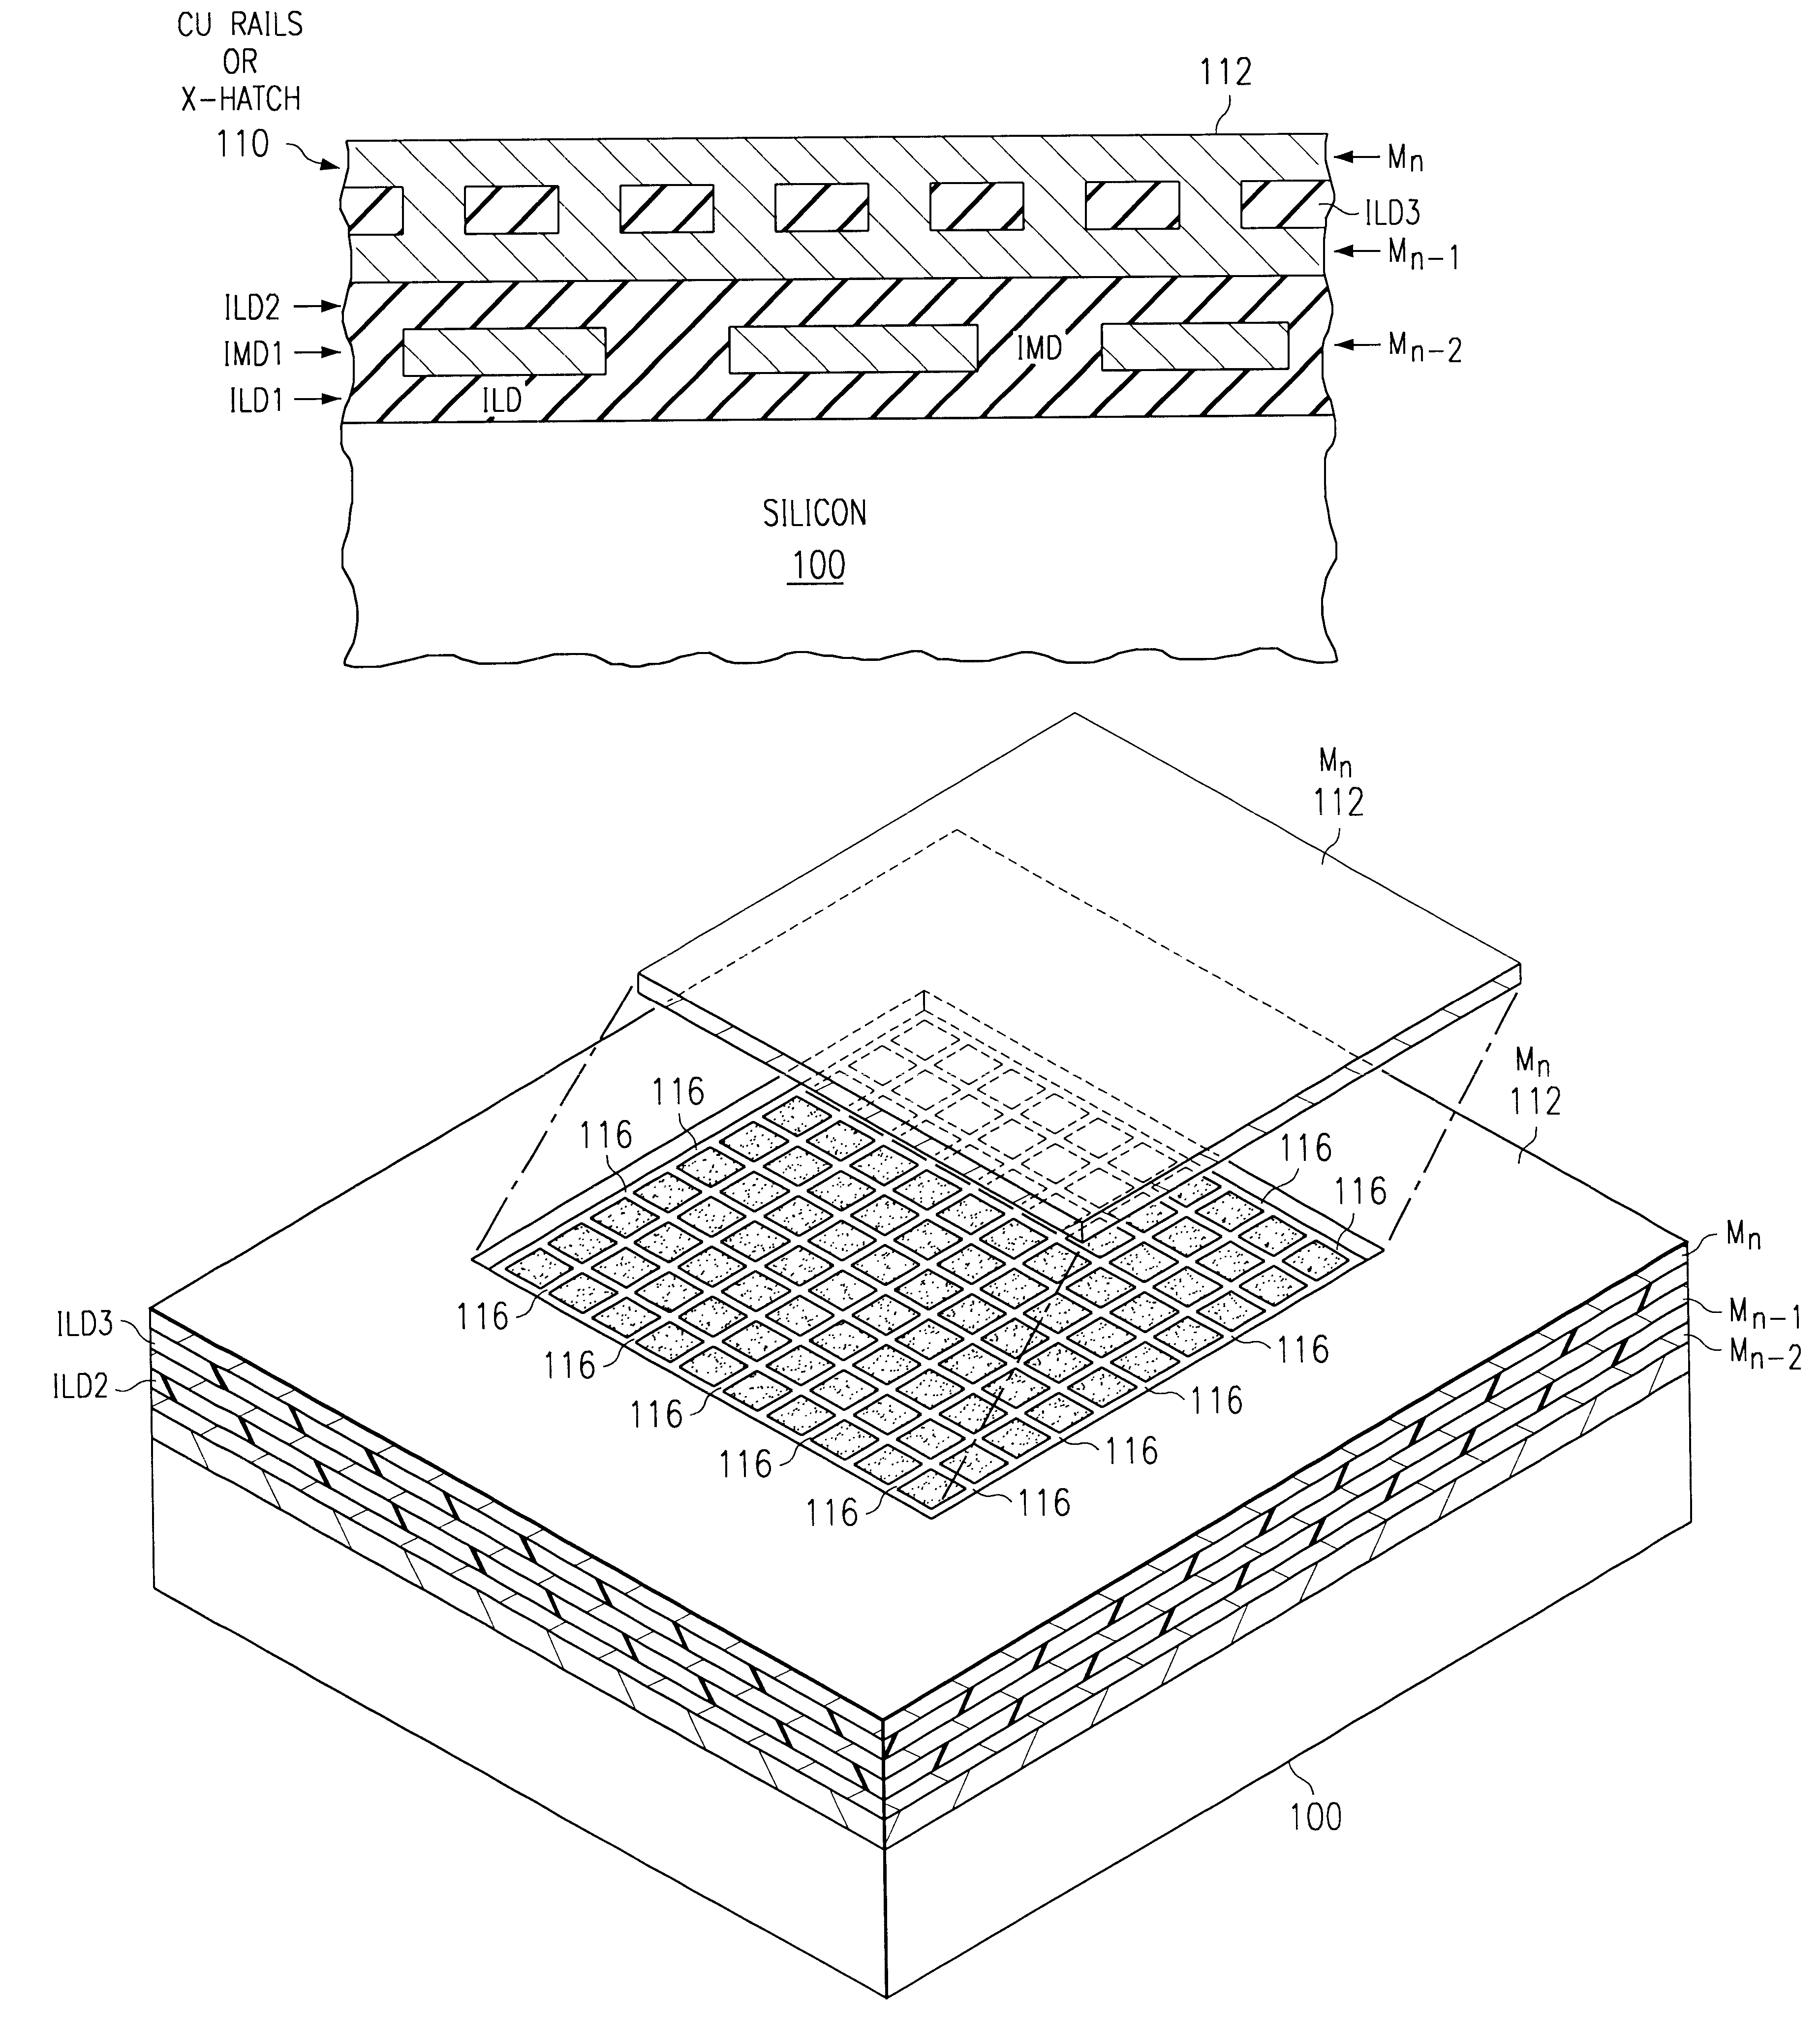 Approach to structurally reinforcing the mechanical performance of silicon level interconnect layers